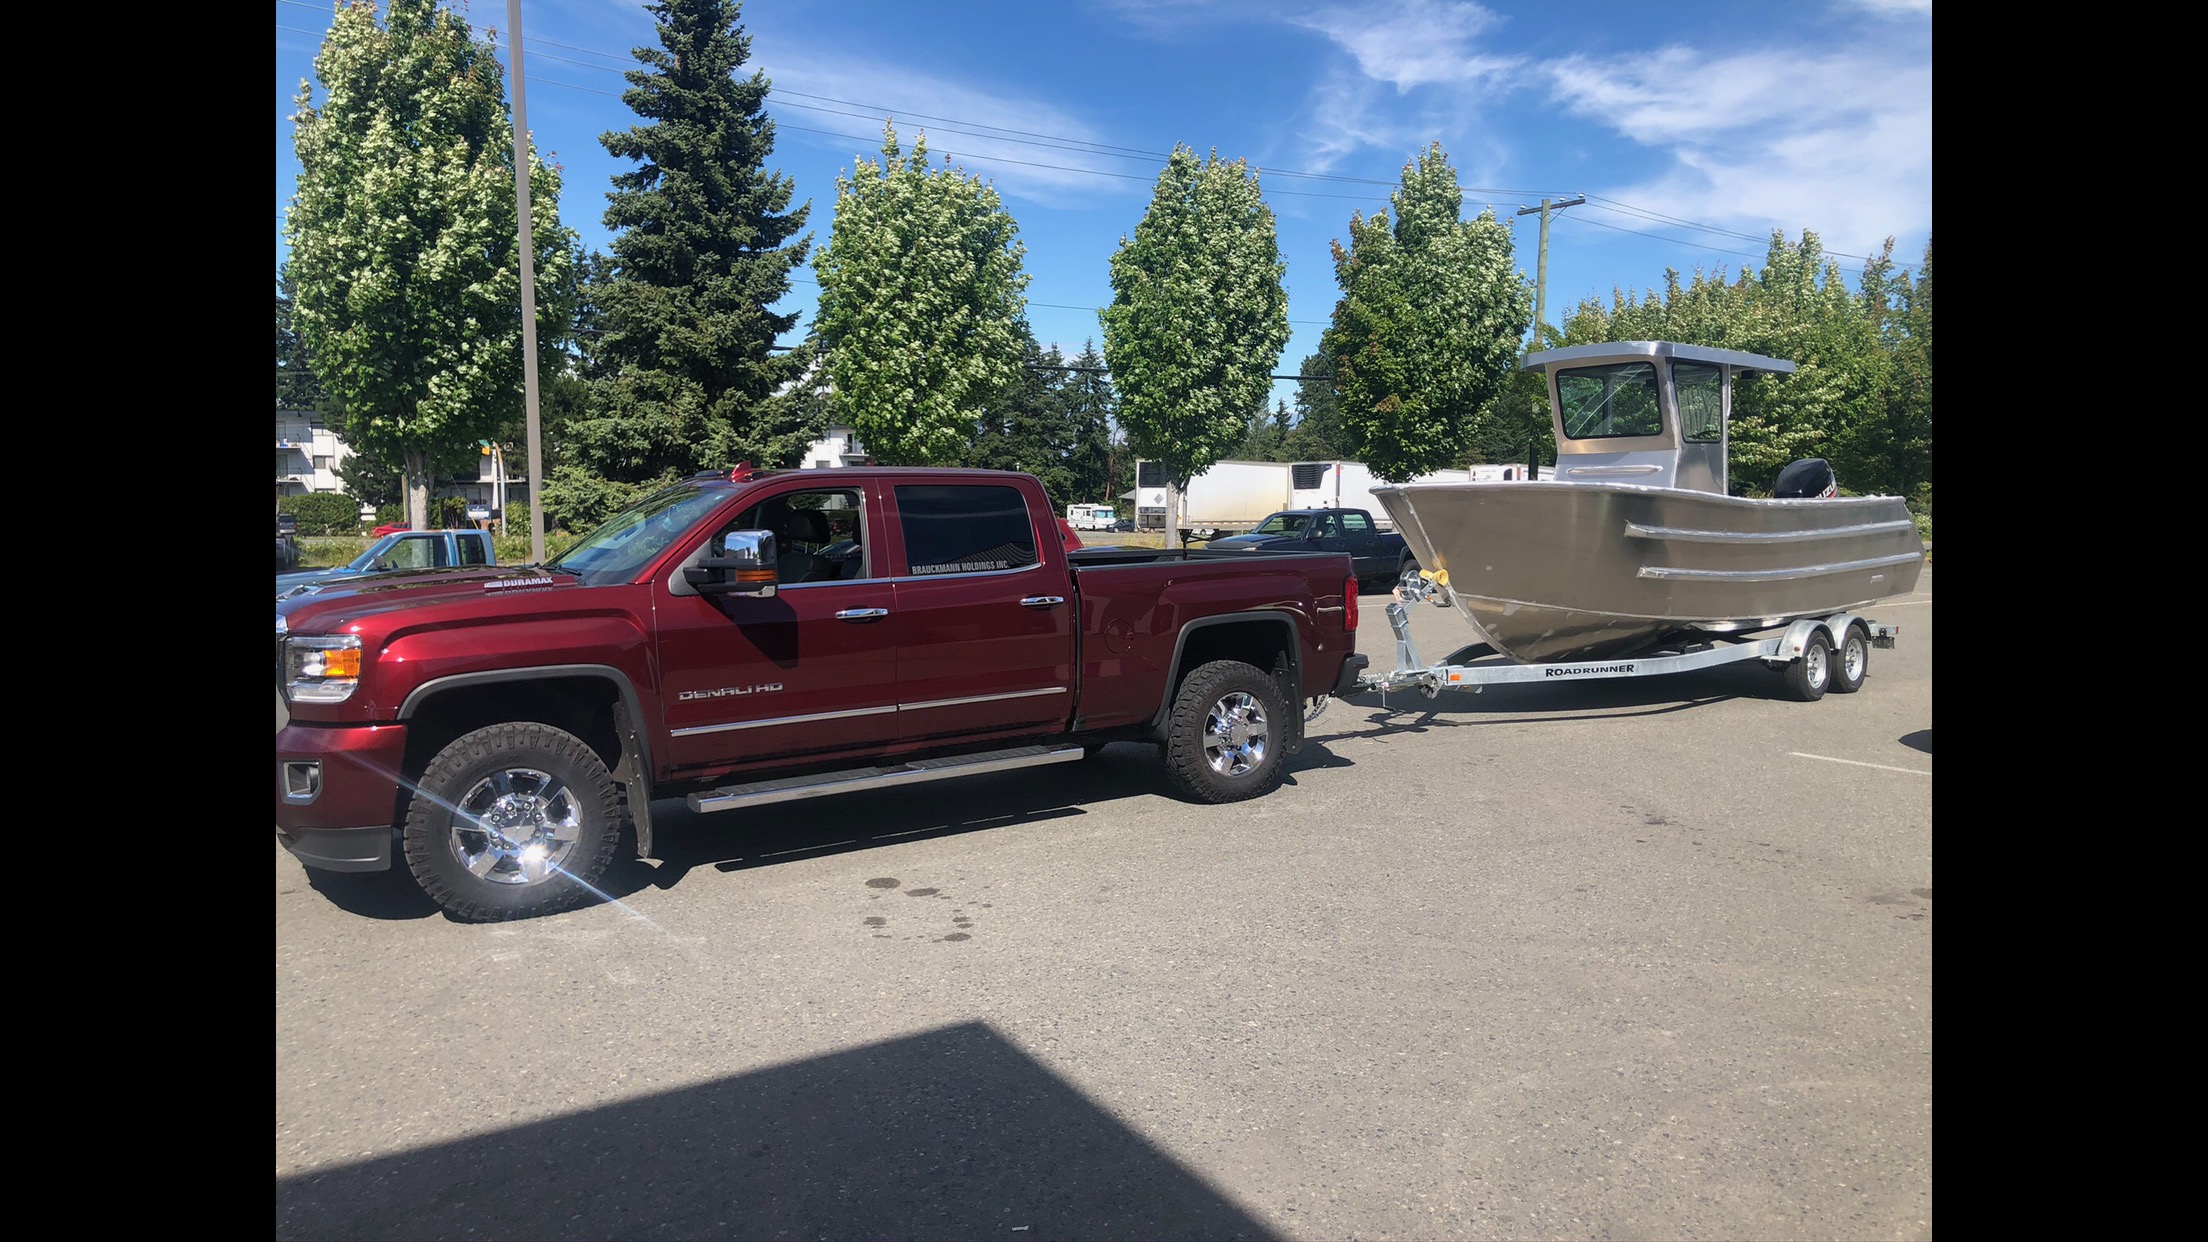 HB Towing towing boat trailer and boat